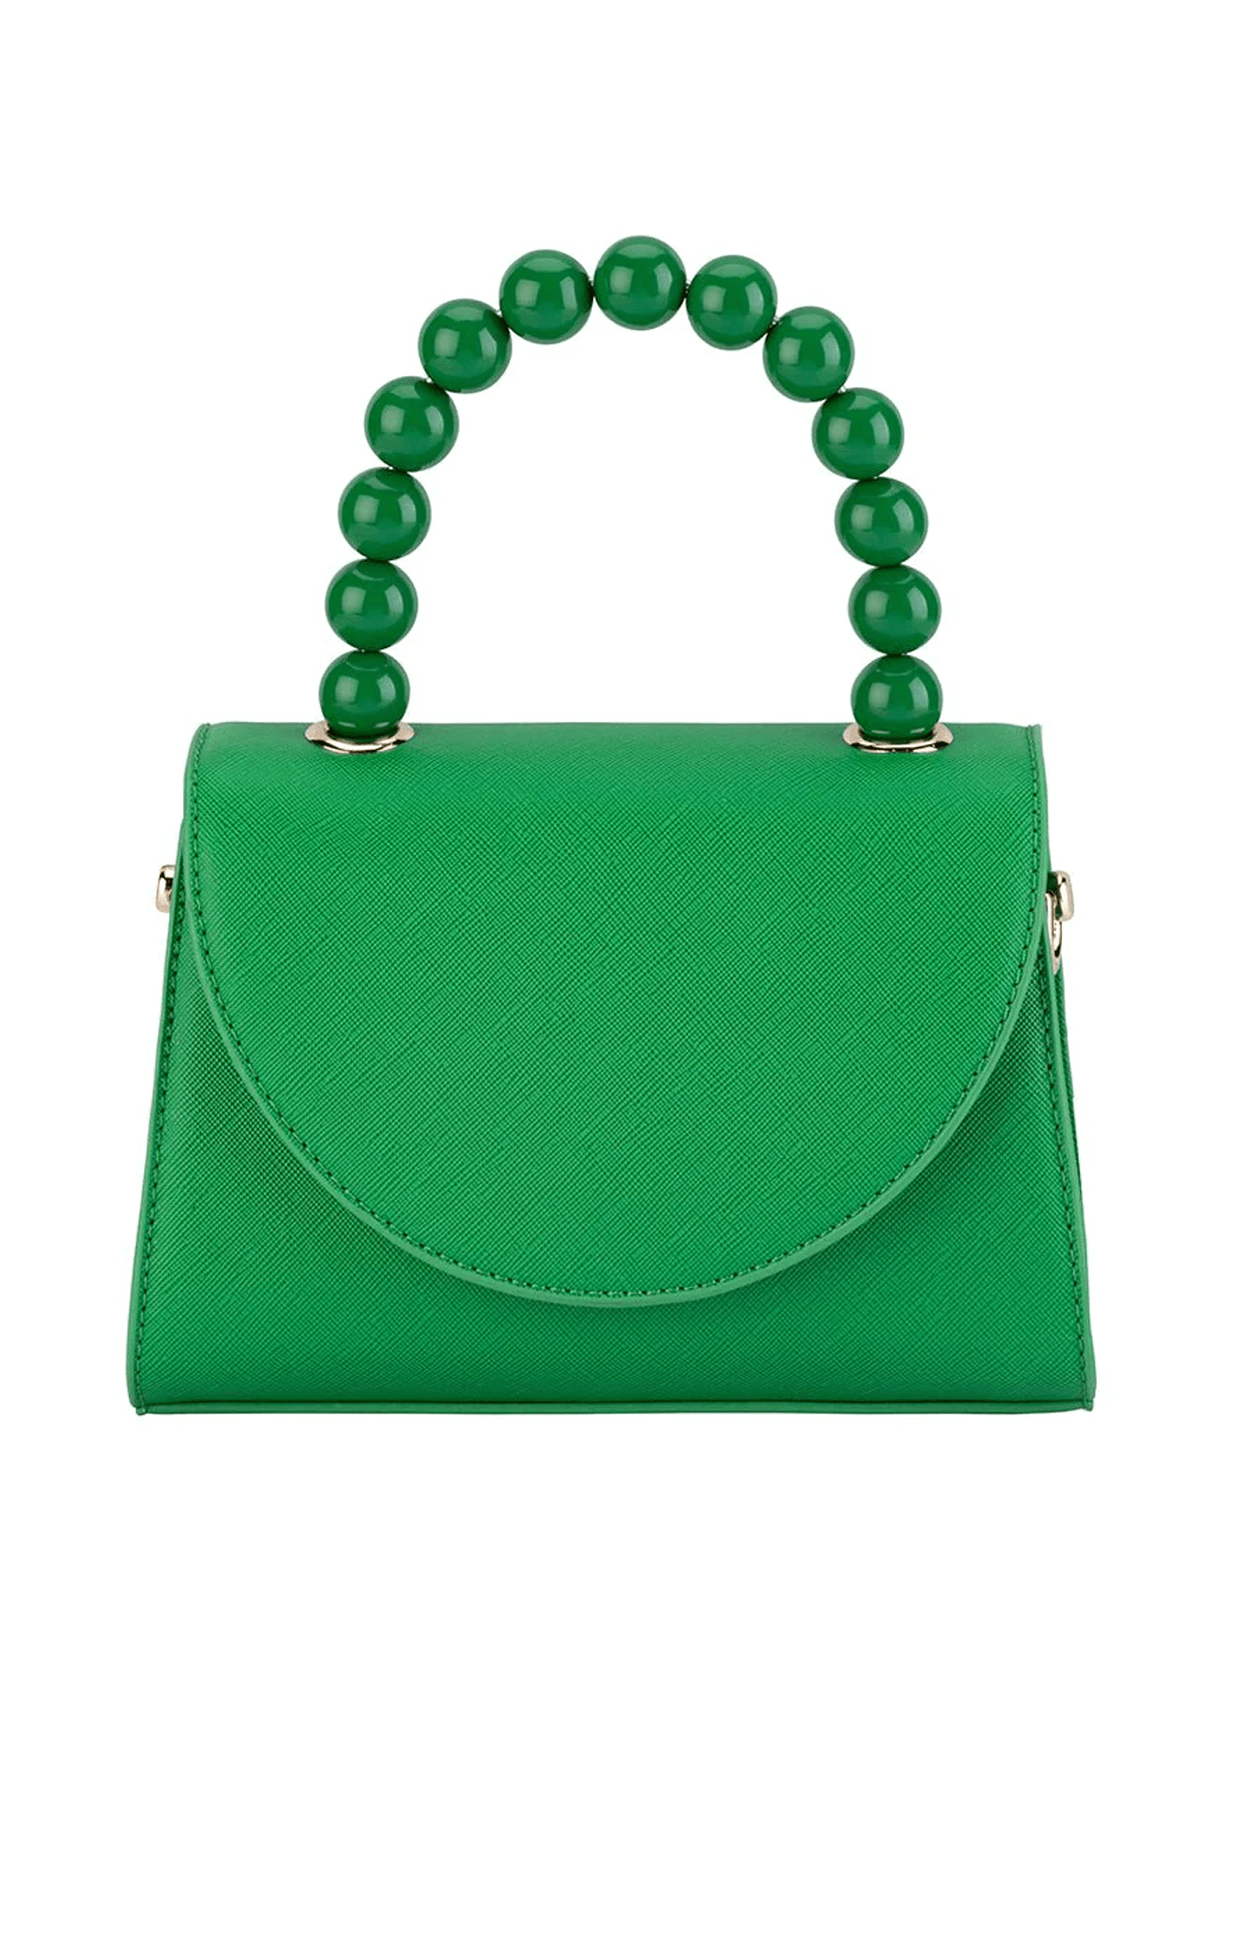 ACCESSORIES Bags Clutches One Size / Green WENDY BEAD HANDLE BAG IN GREEN